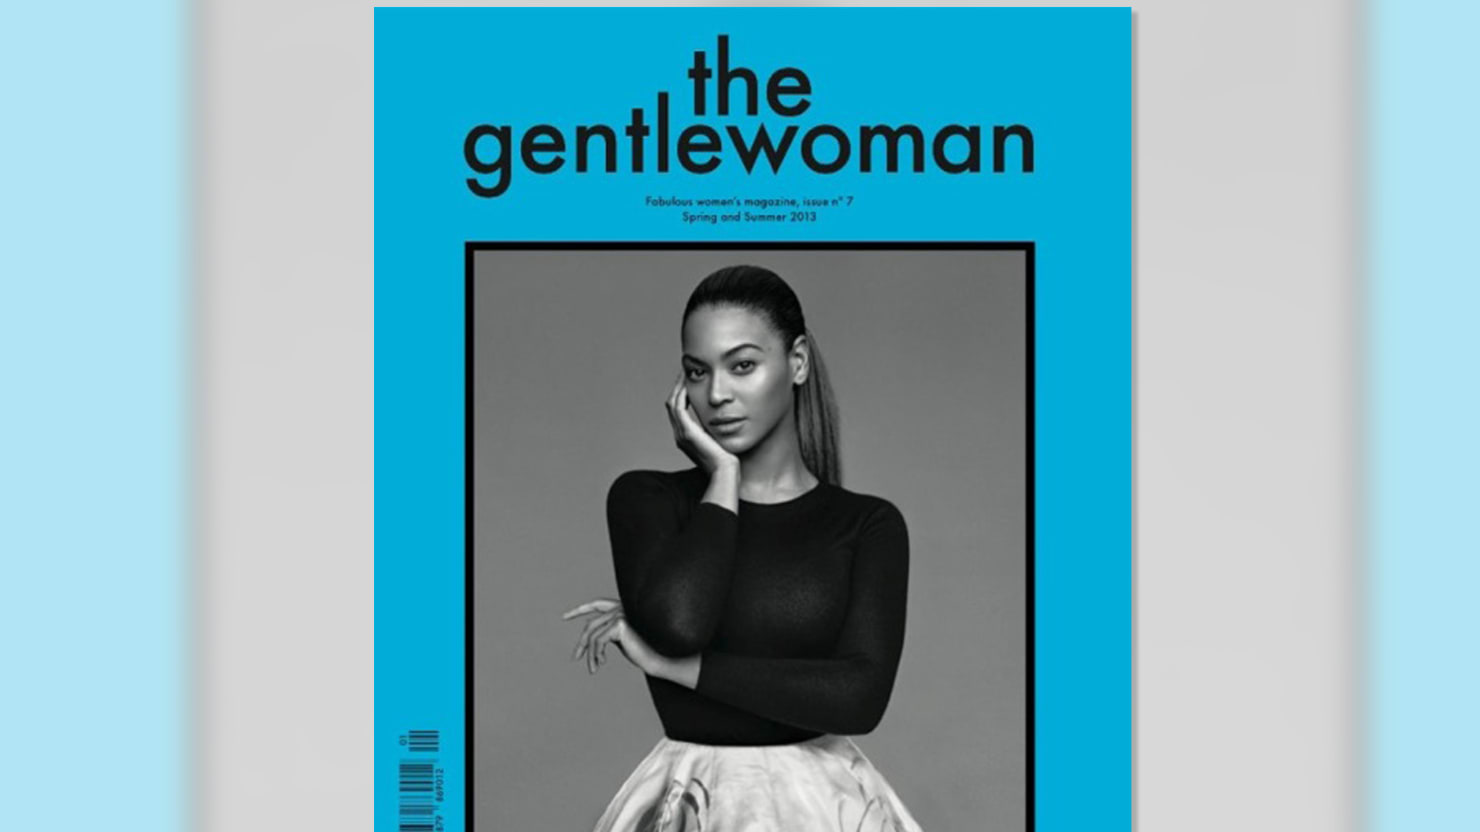 Beyoncé Poses for The Gentlewoman, Liberty Ross’s New Film Role